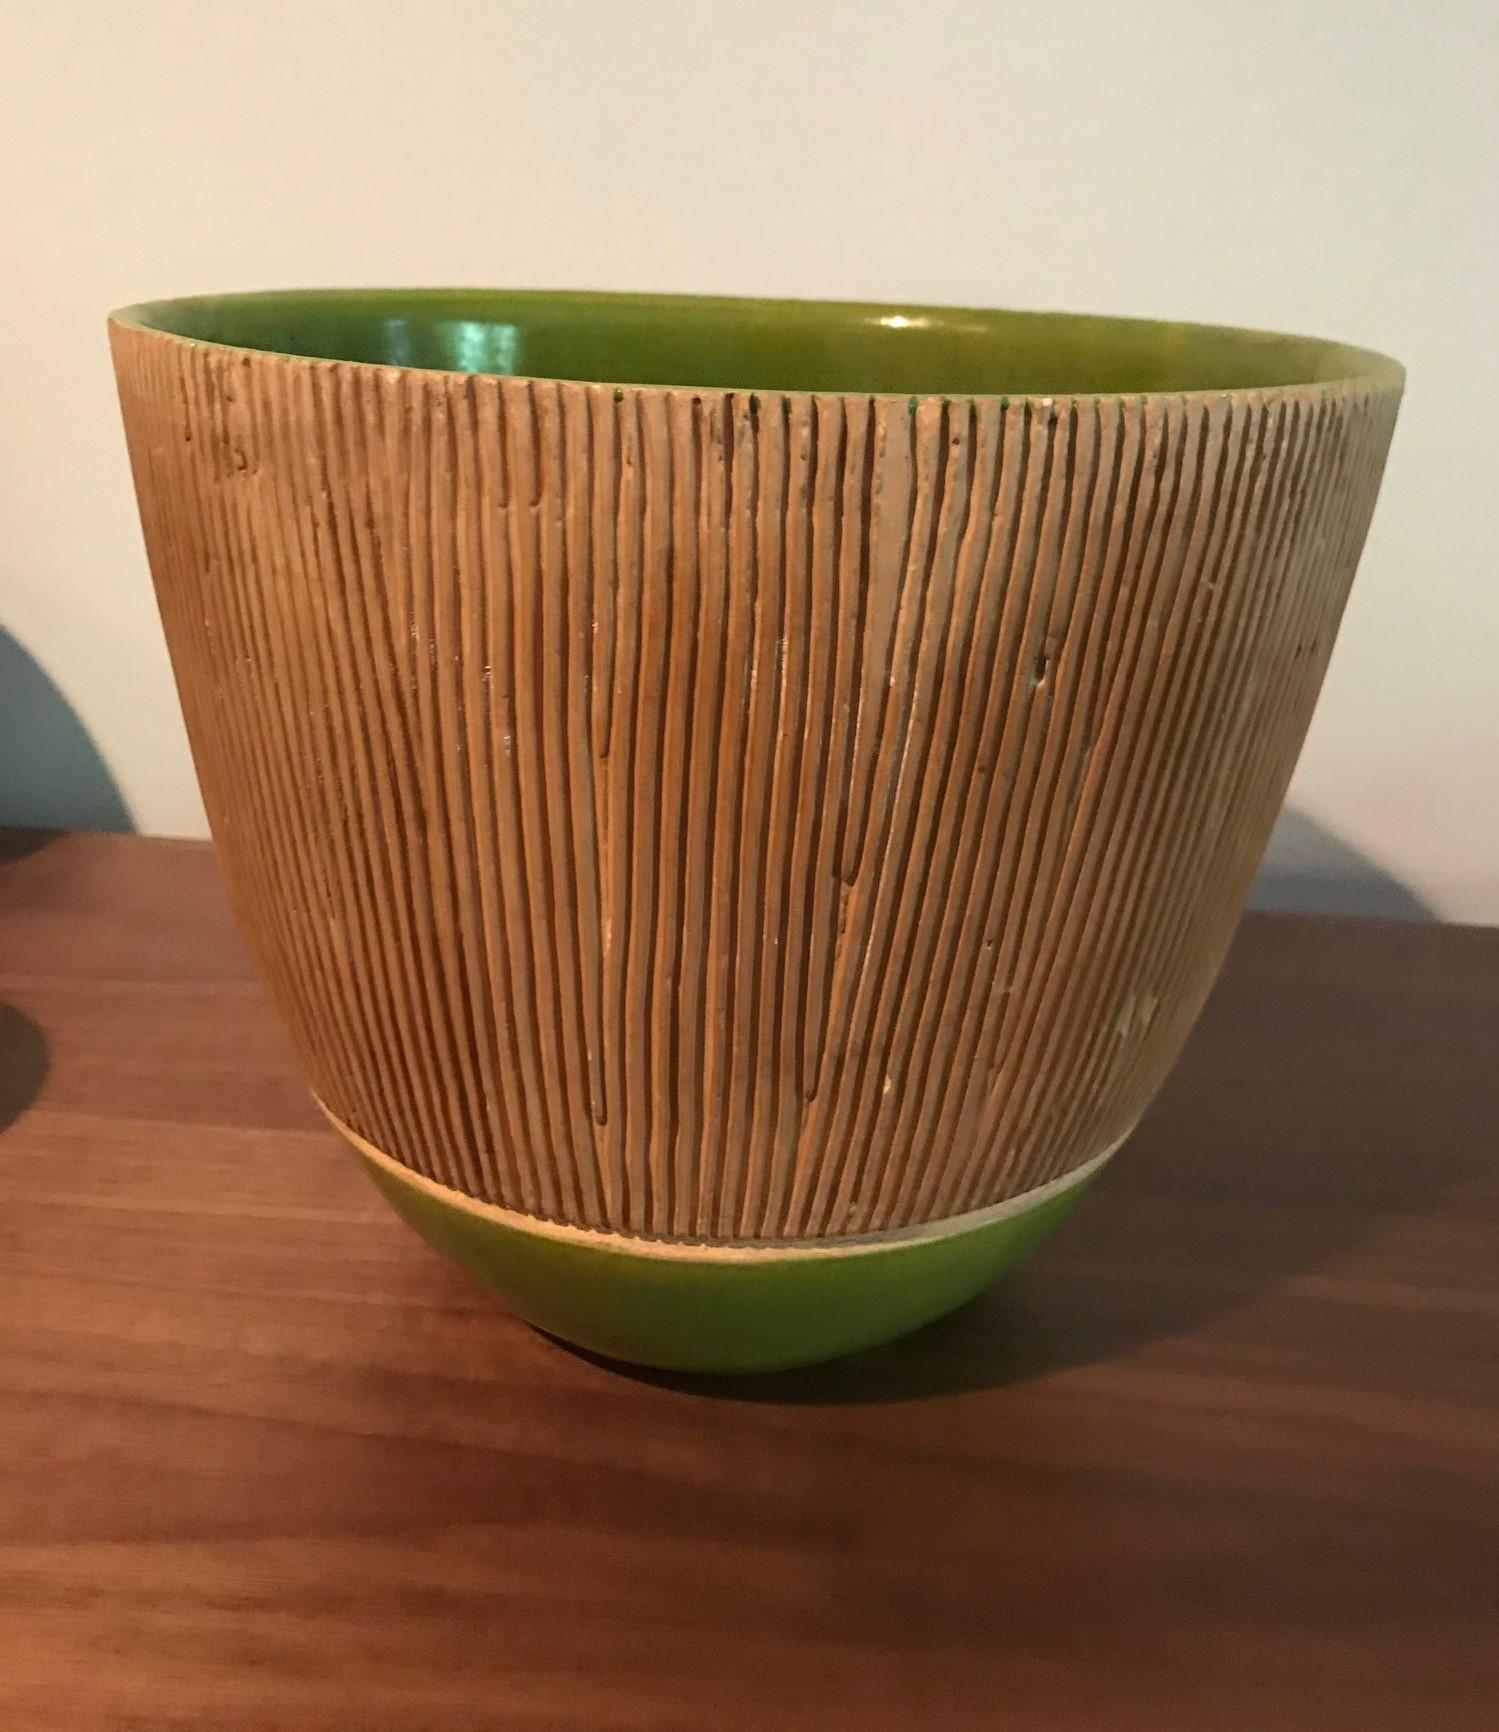 A fantastic, relatively massive work by renowned American potter Laura Andreson. Gorgeous in design and color. 

Signed and dated (1938) on base. 

Andreson, who studied under Glen Lukens, founded and headed the ceramics department at UCLA from